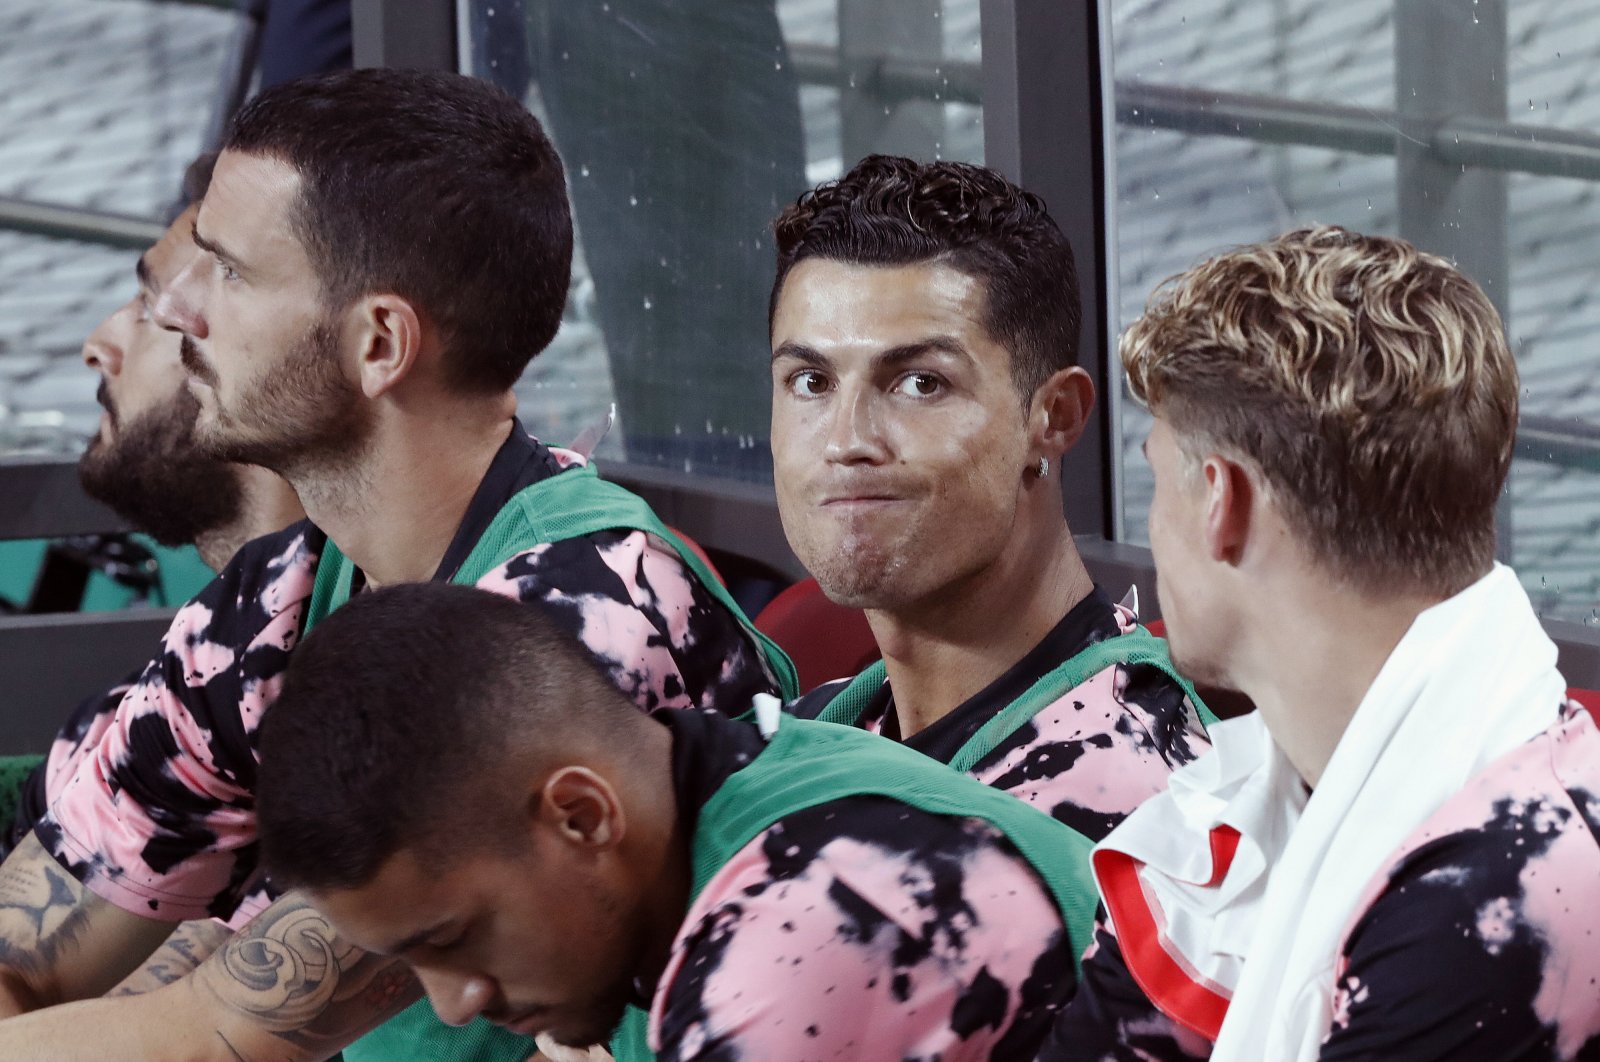 Cristiano Ronaldo (C) sits on the bench during the friendly match in Seoul, South Korea, July 26, 2019. (AP Photo)